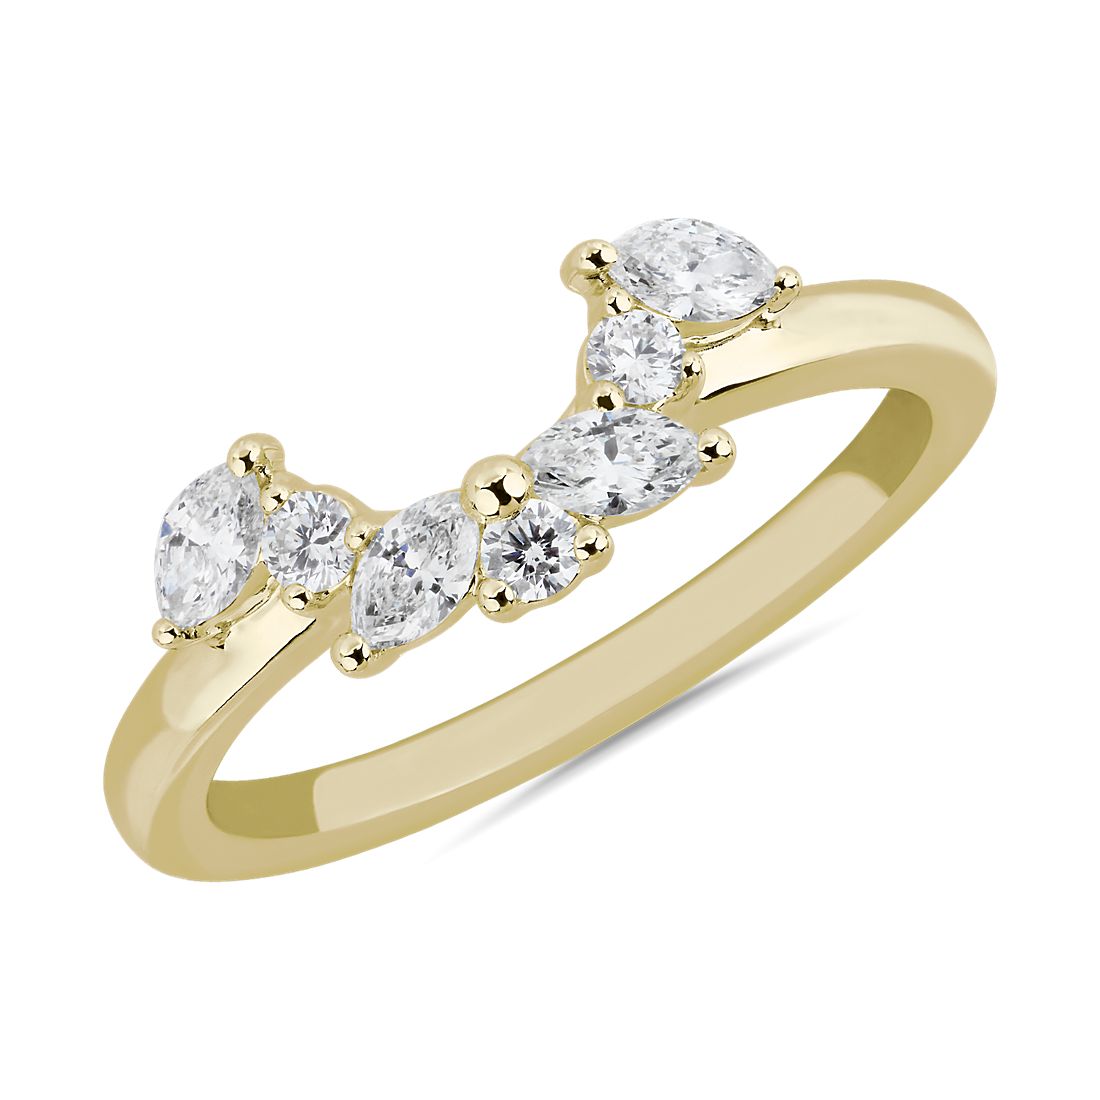 Romantic Marquise Curved Semi-Halo Diamond Wrap Ring in 14k Yellow Gold (1/3 ct. tw.)